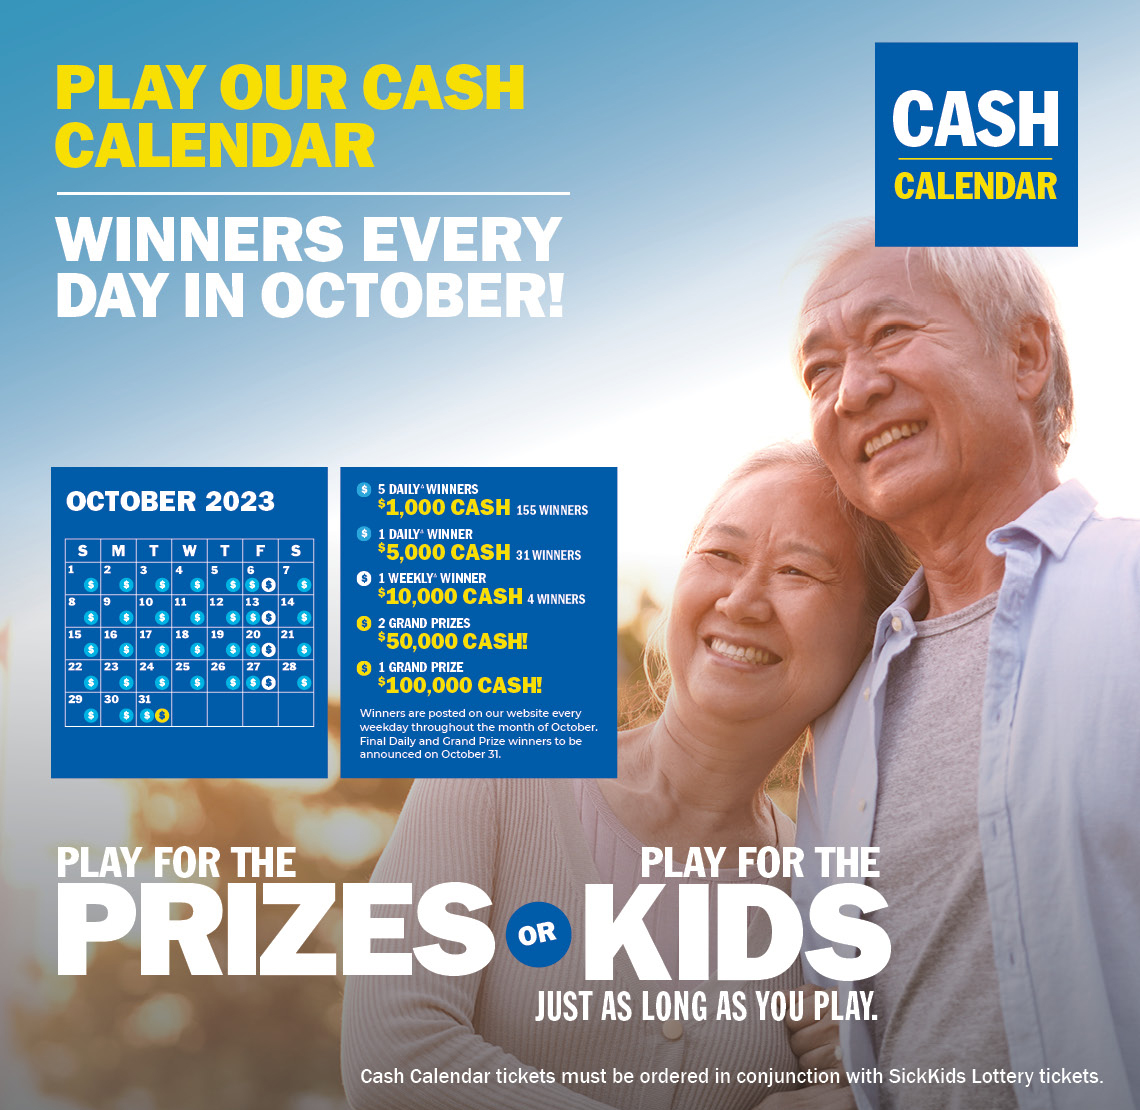 PLAY OUR CASH CALENDAR - WINNERS EVERY DAY IN OCTOBER